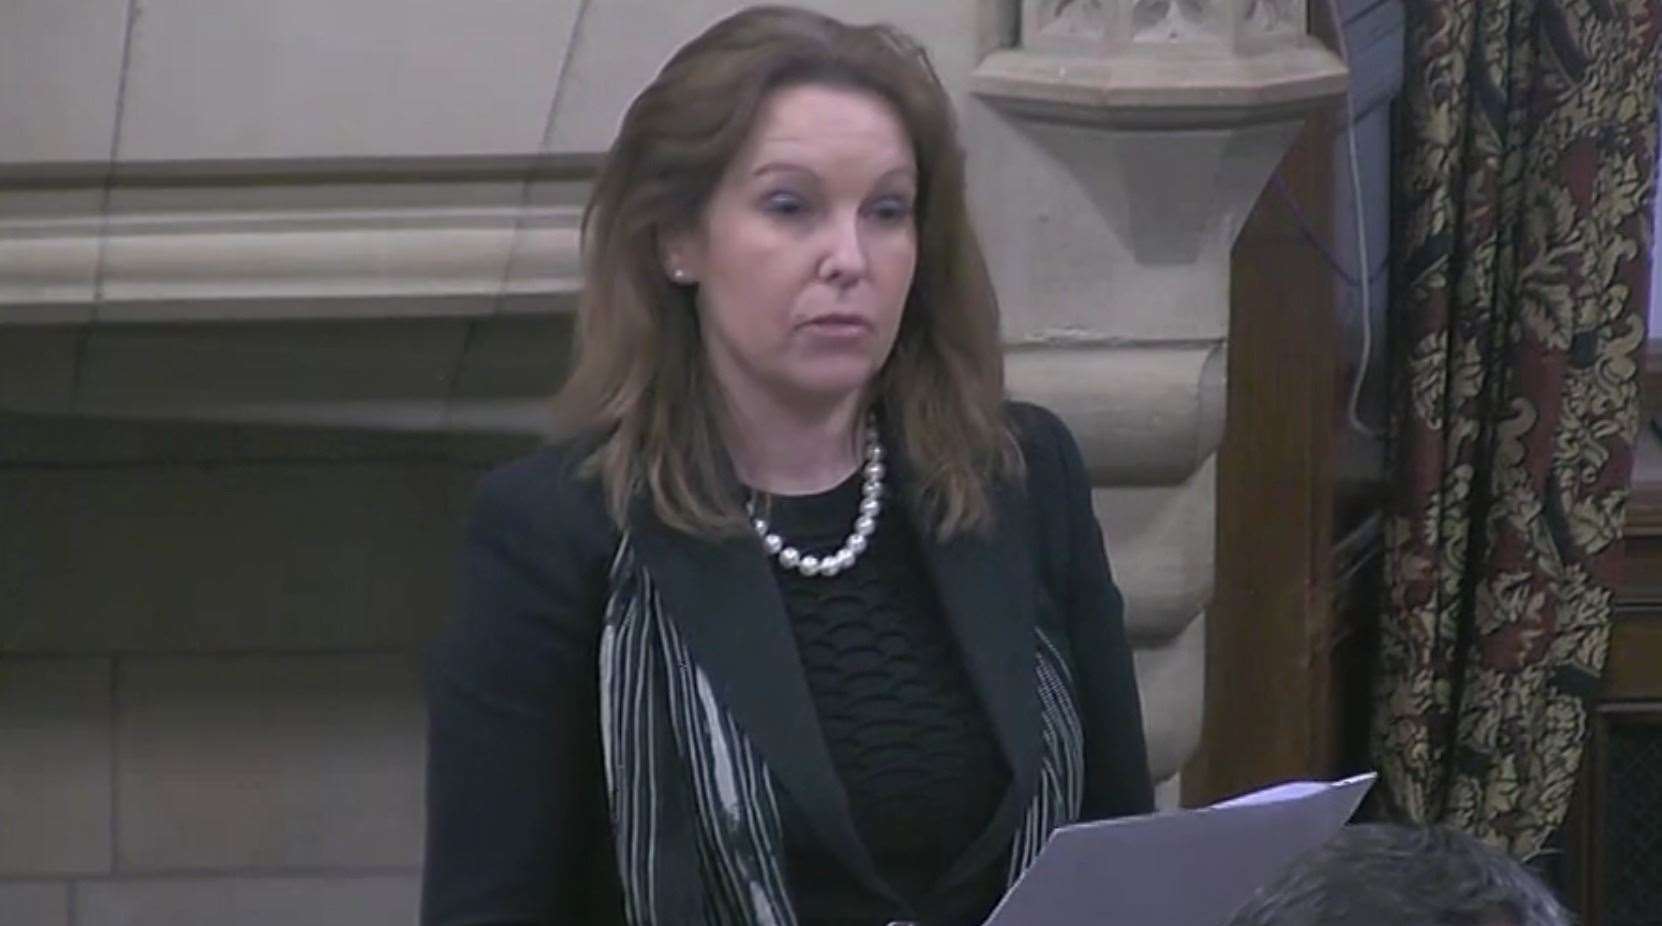 Speaking at Westminster Hall, MP Natalie Elphicke said she hopes Lucas' Law will move forward over the next year. Picture: Parliamentlive.TV